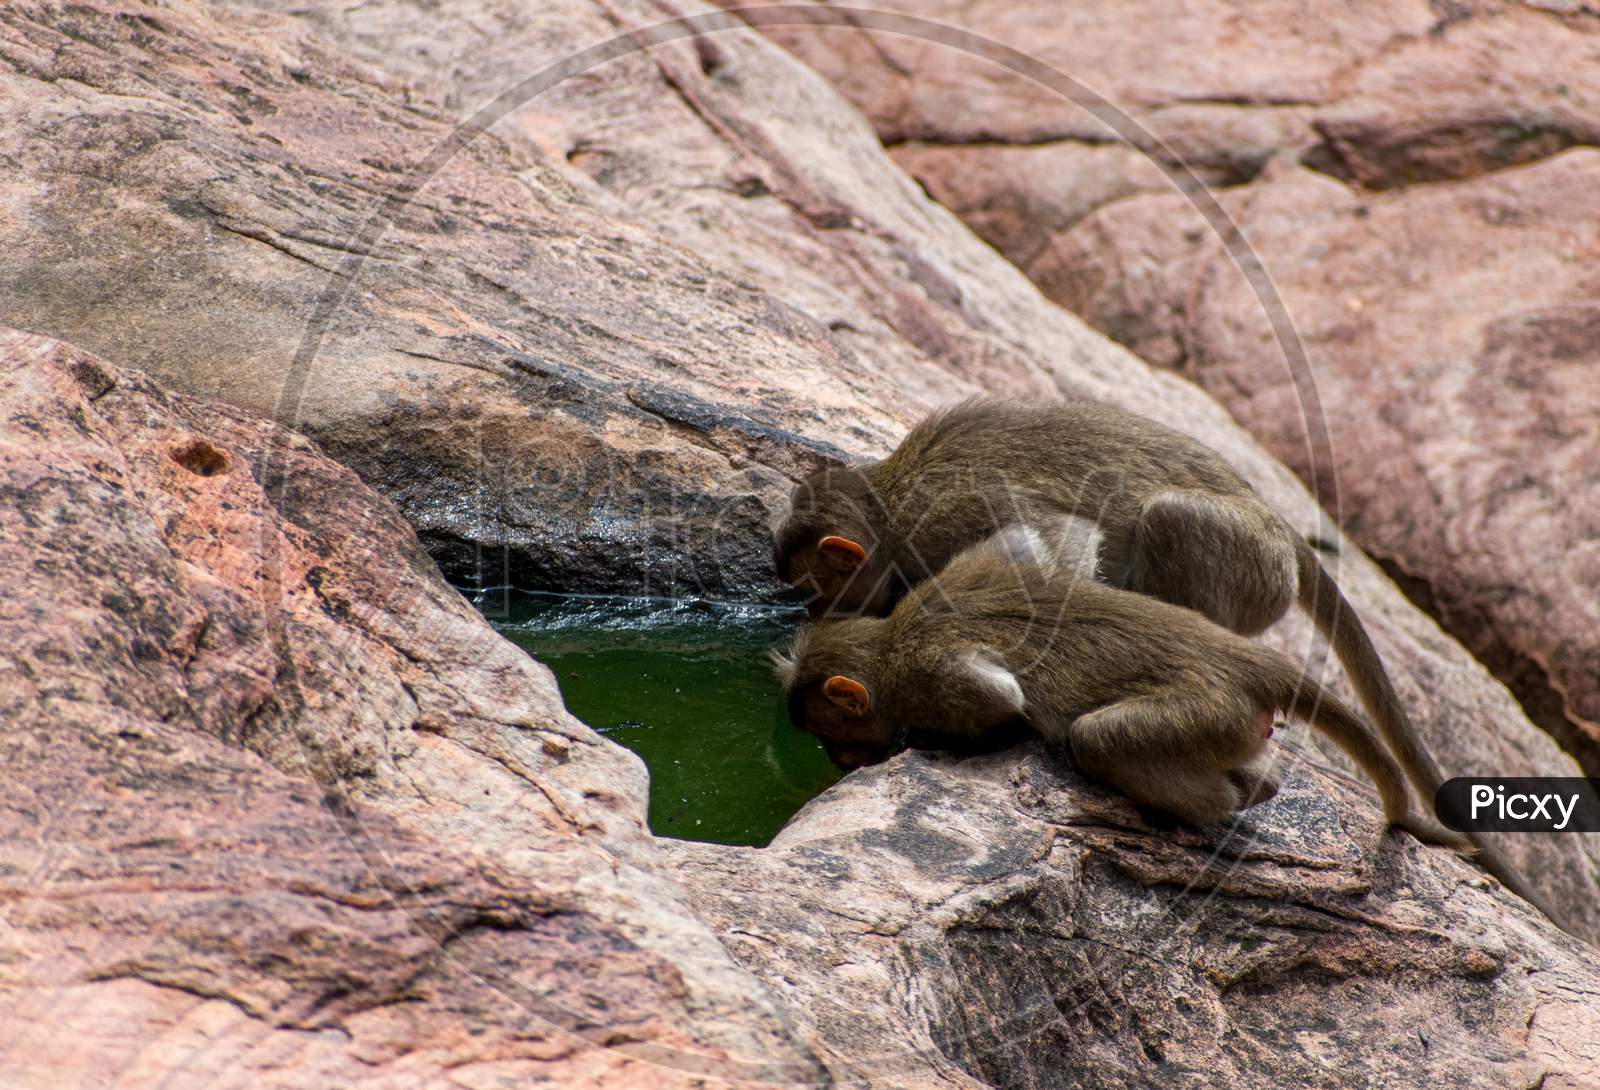 Two thirsty monkeys drinking water, deposited on the water holes in a Rocky surface during summer.